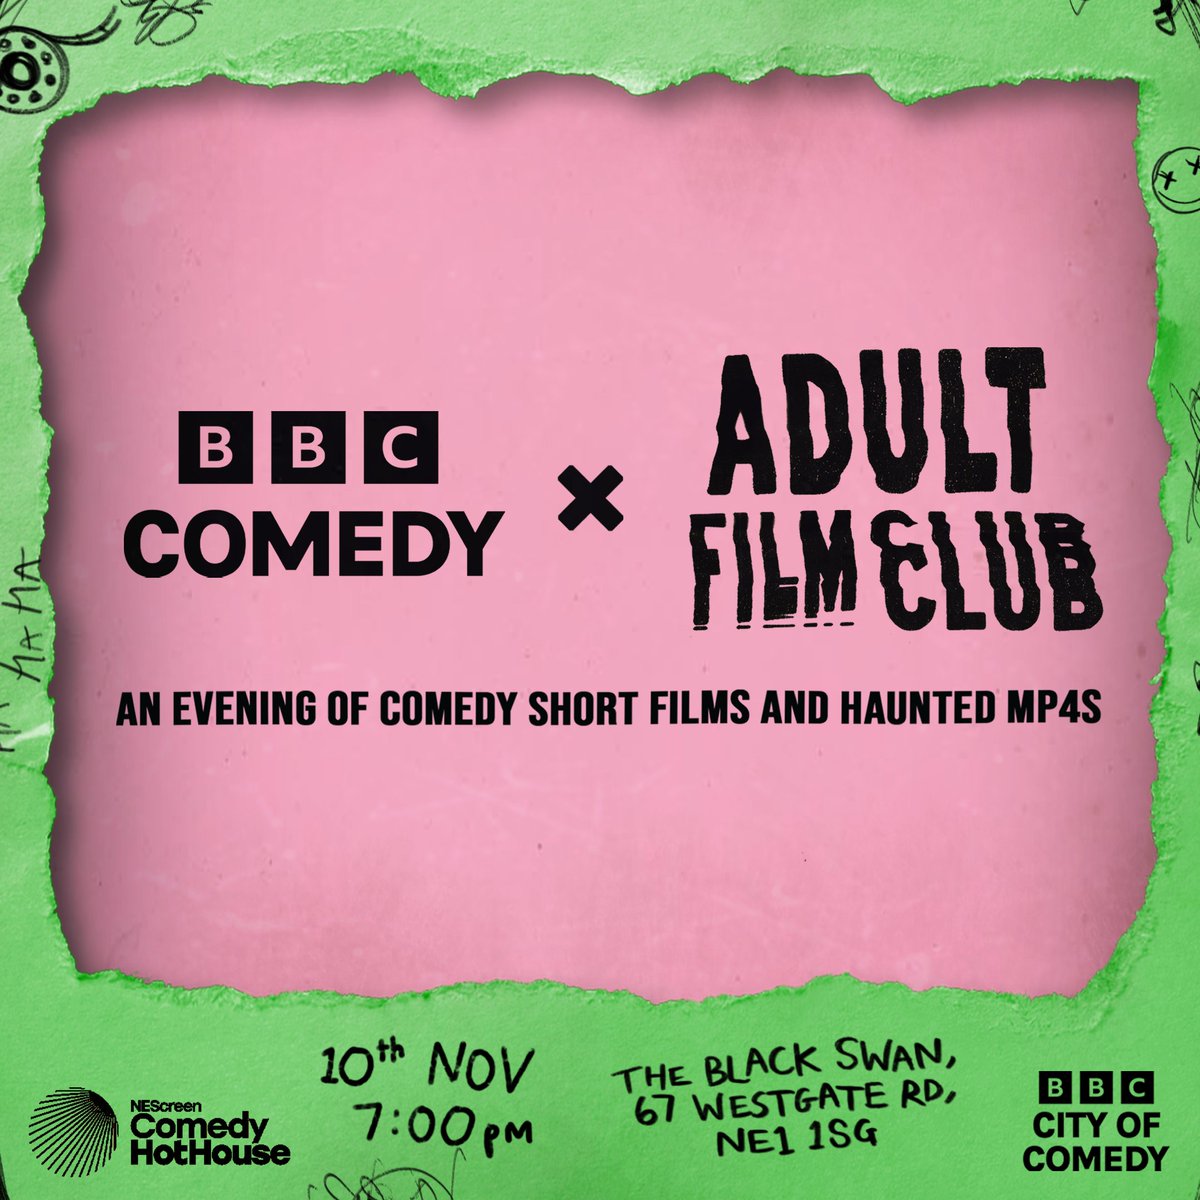 Then, @AdultFilmClub_ returns for another night of comedy short films. This will take place at The Black Swan in Newcastle, with doors opening at 7pm and the event starting at 8pm. The first event sold out so be sure to reserve your ticket today: bit.ly/3rj9glO